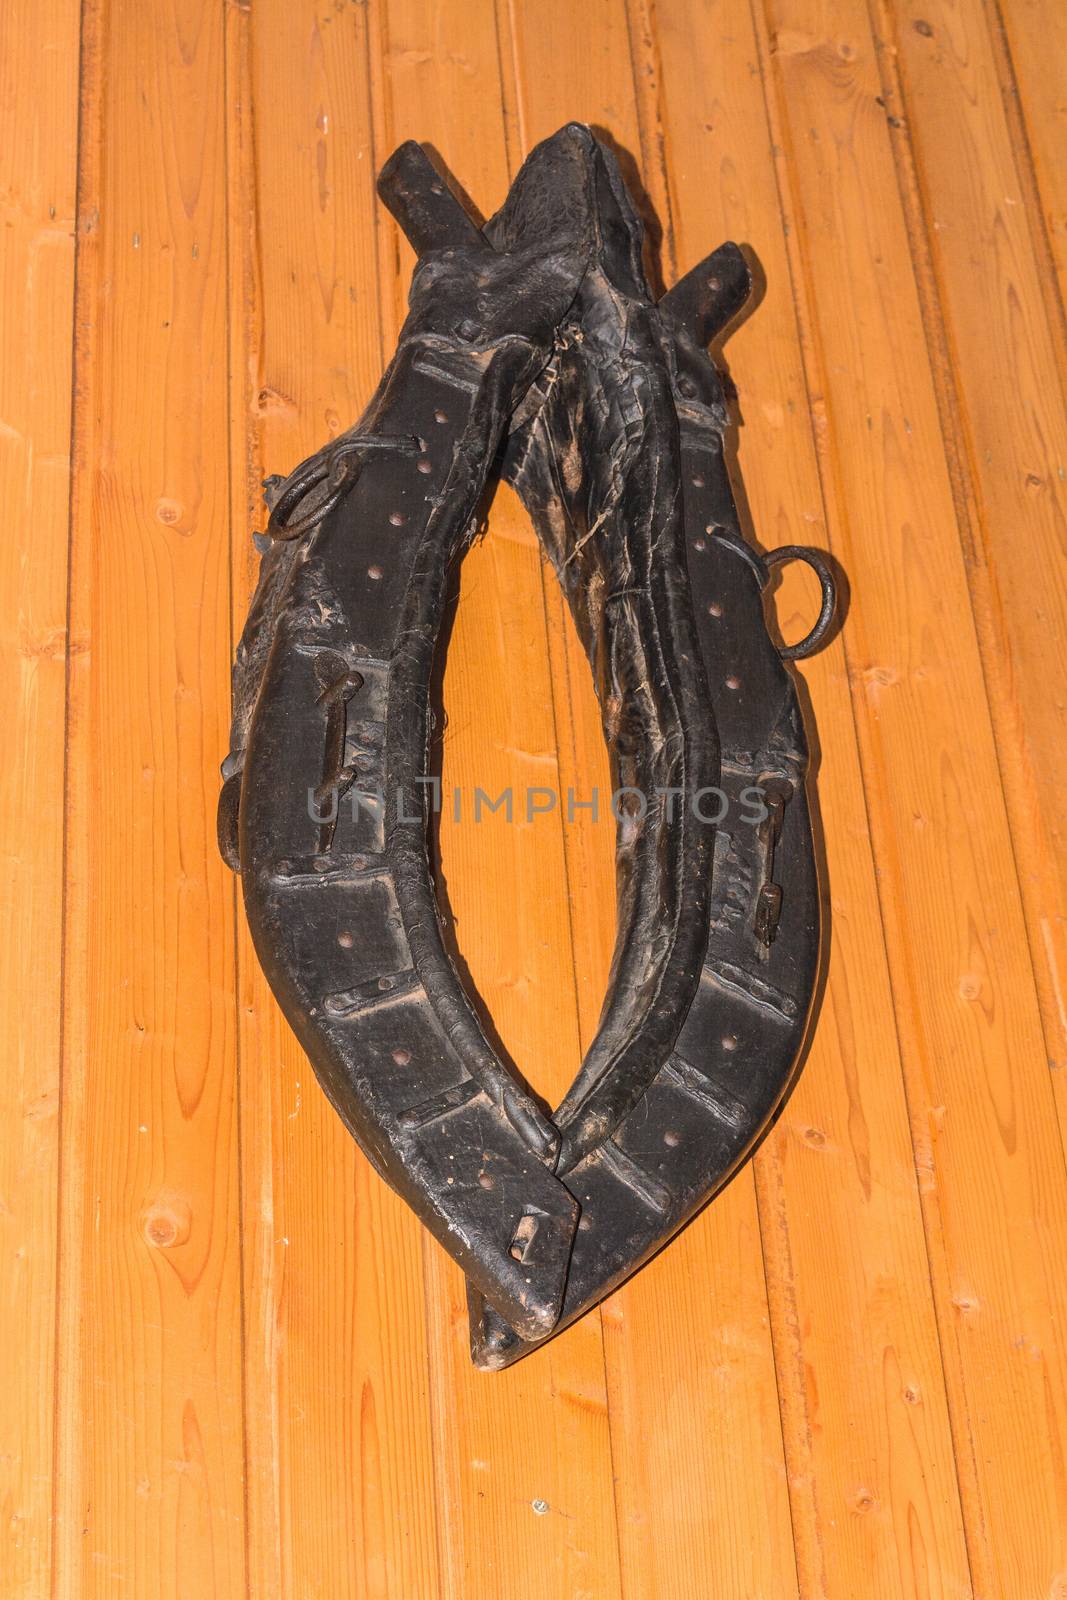 Horse tack on a wooden wall. by JFsPic